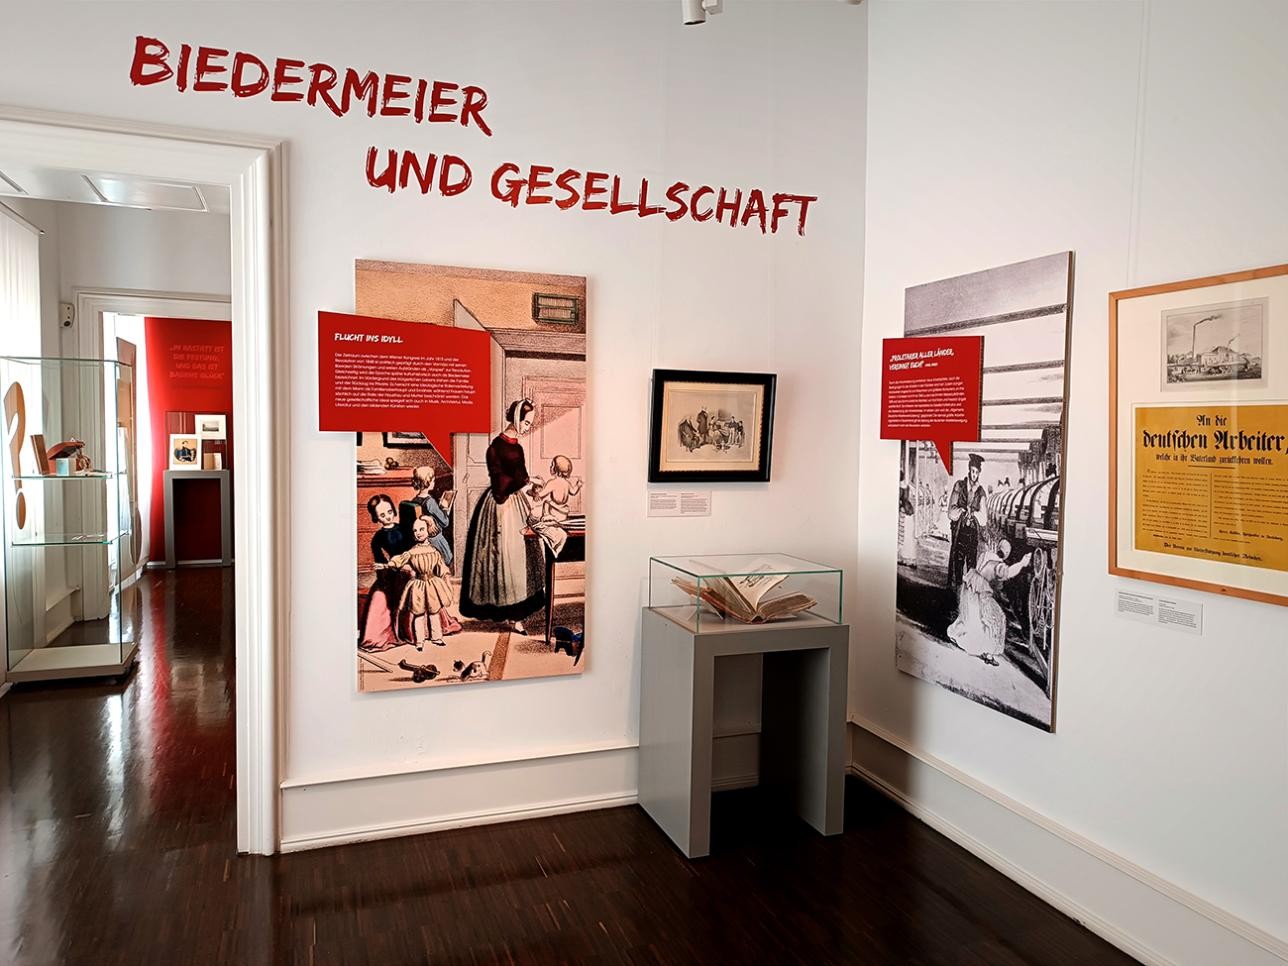 Room with pictures and information texts on the special exhibition: "For Freedom! Rastatt and the 1848/49 Revolution"